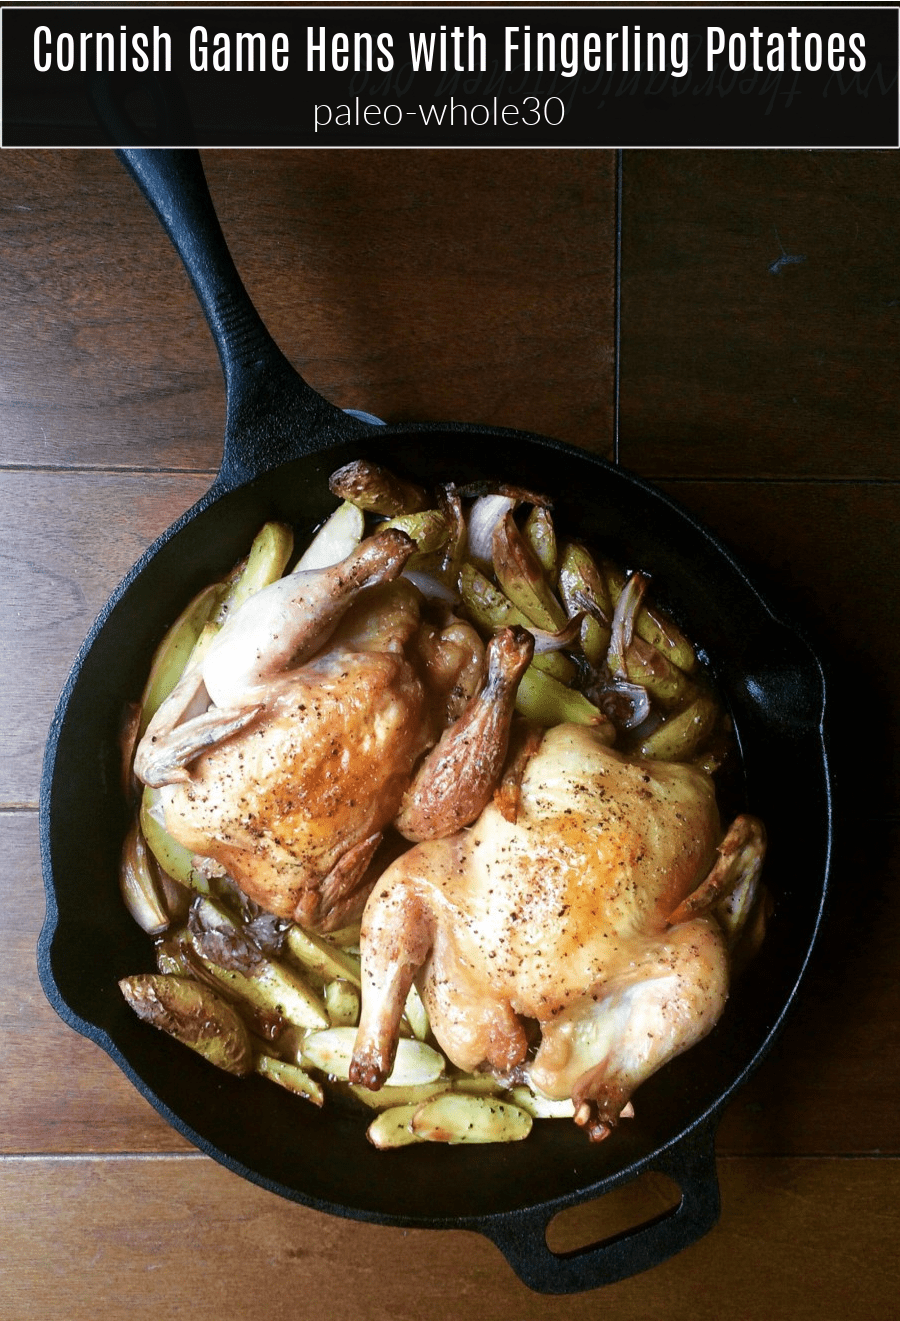 Roasted Game Hens with Fingerling Potatoes in cast iron skillet